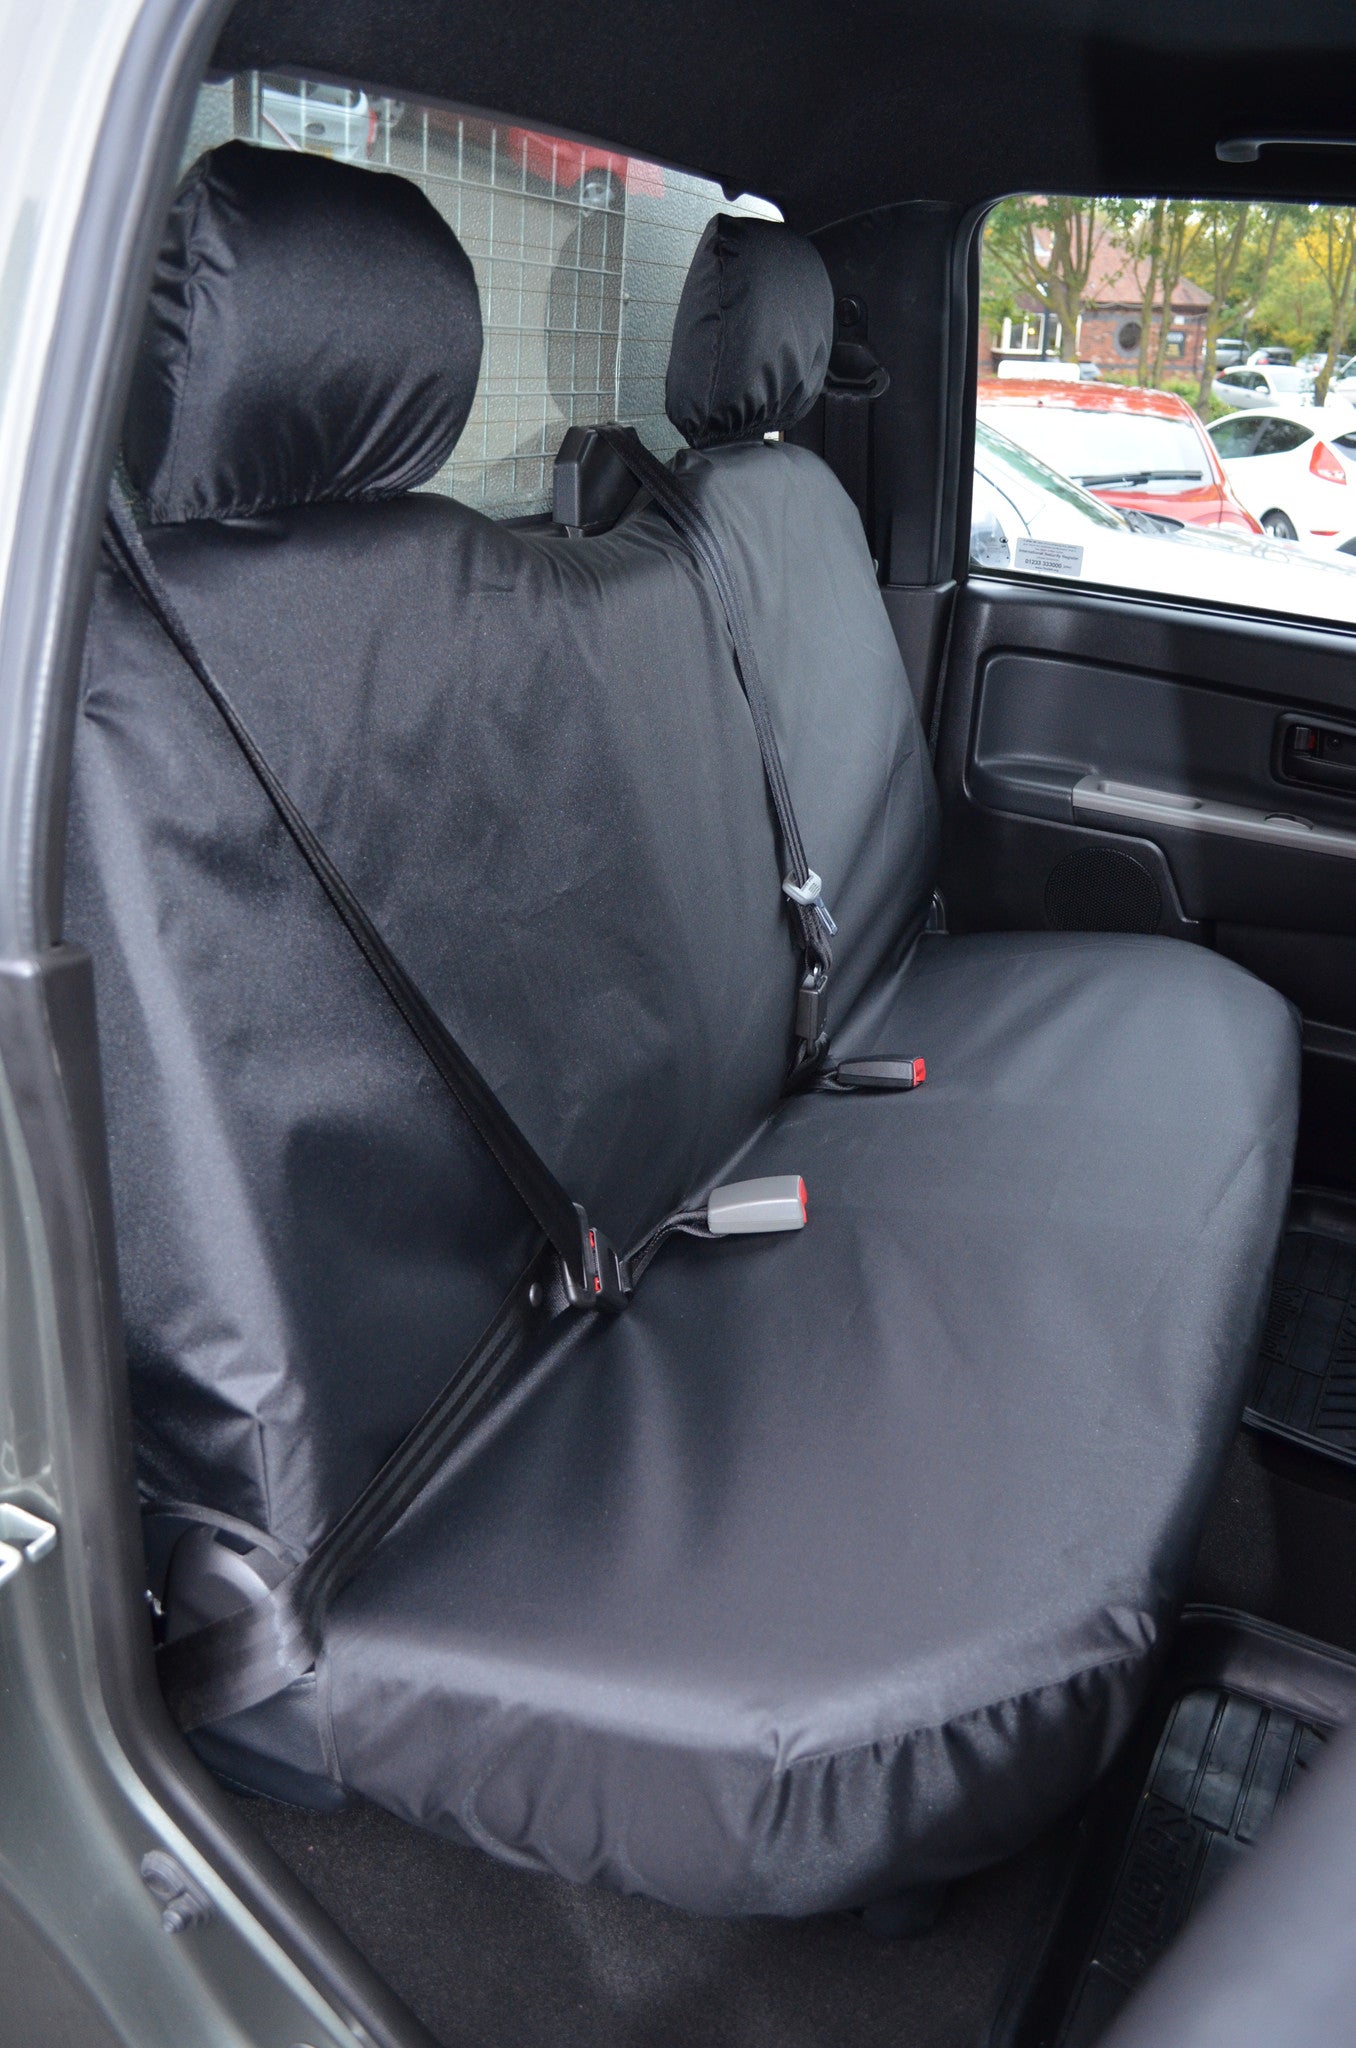 Great Wall Steed 2012 Onwards Seat Covers Rear Seat Cover / Black Turtle Covers Ltd